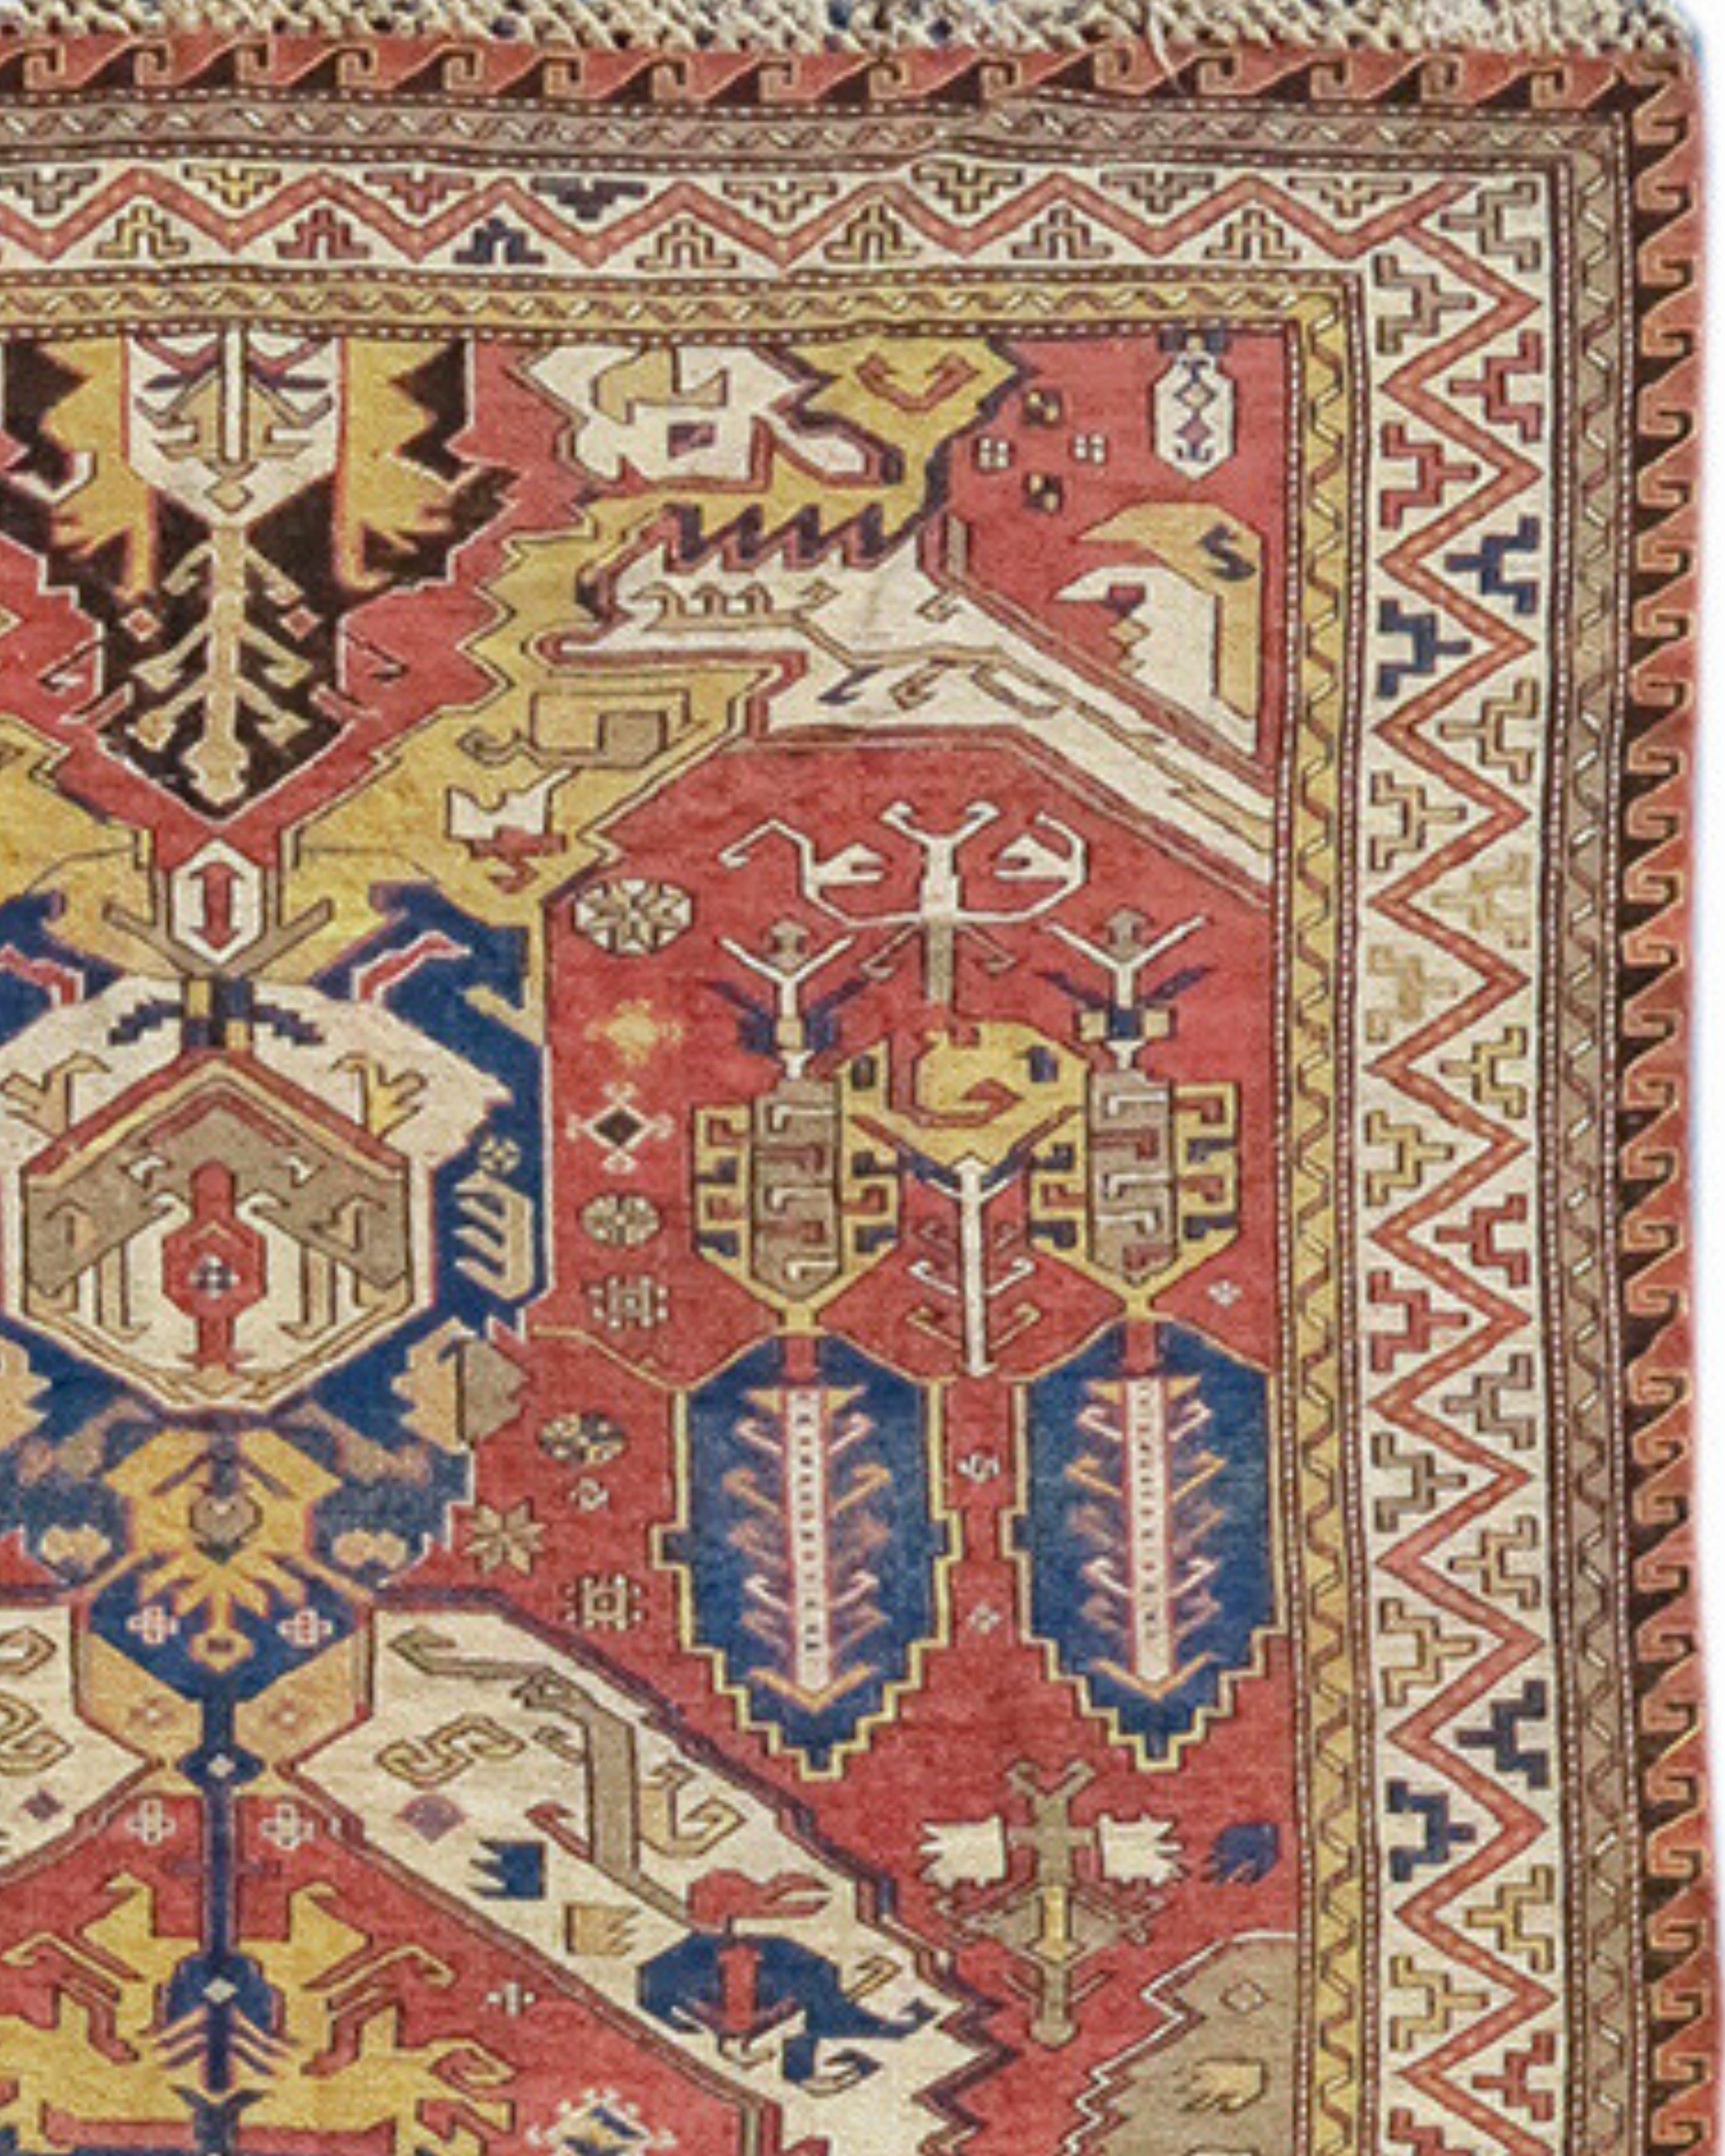 Antique Dragon Sumak Rug, Late 19th Century

Using the flat-woven sumac technique, this Caucasian carpet draws a design derived from the ‘dragon carpets’ of the 17th century. Highly stylized palmettes form a vertical column through the center of the